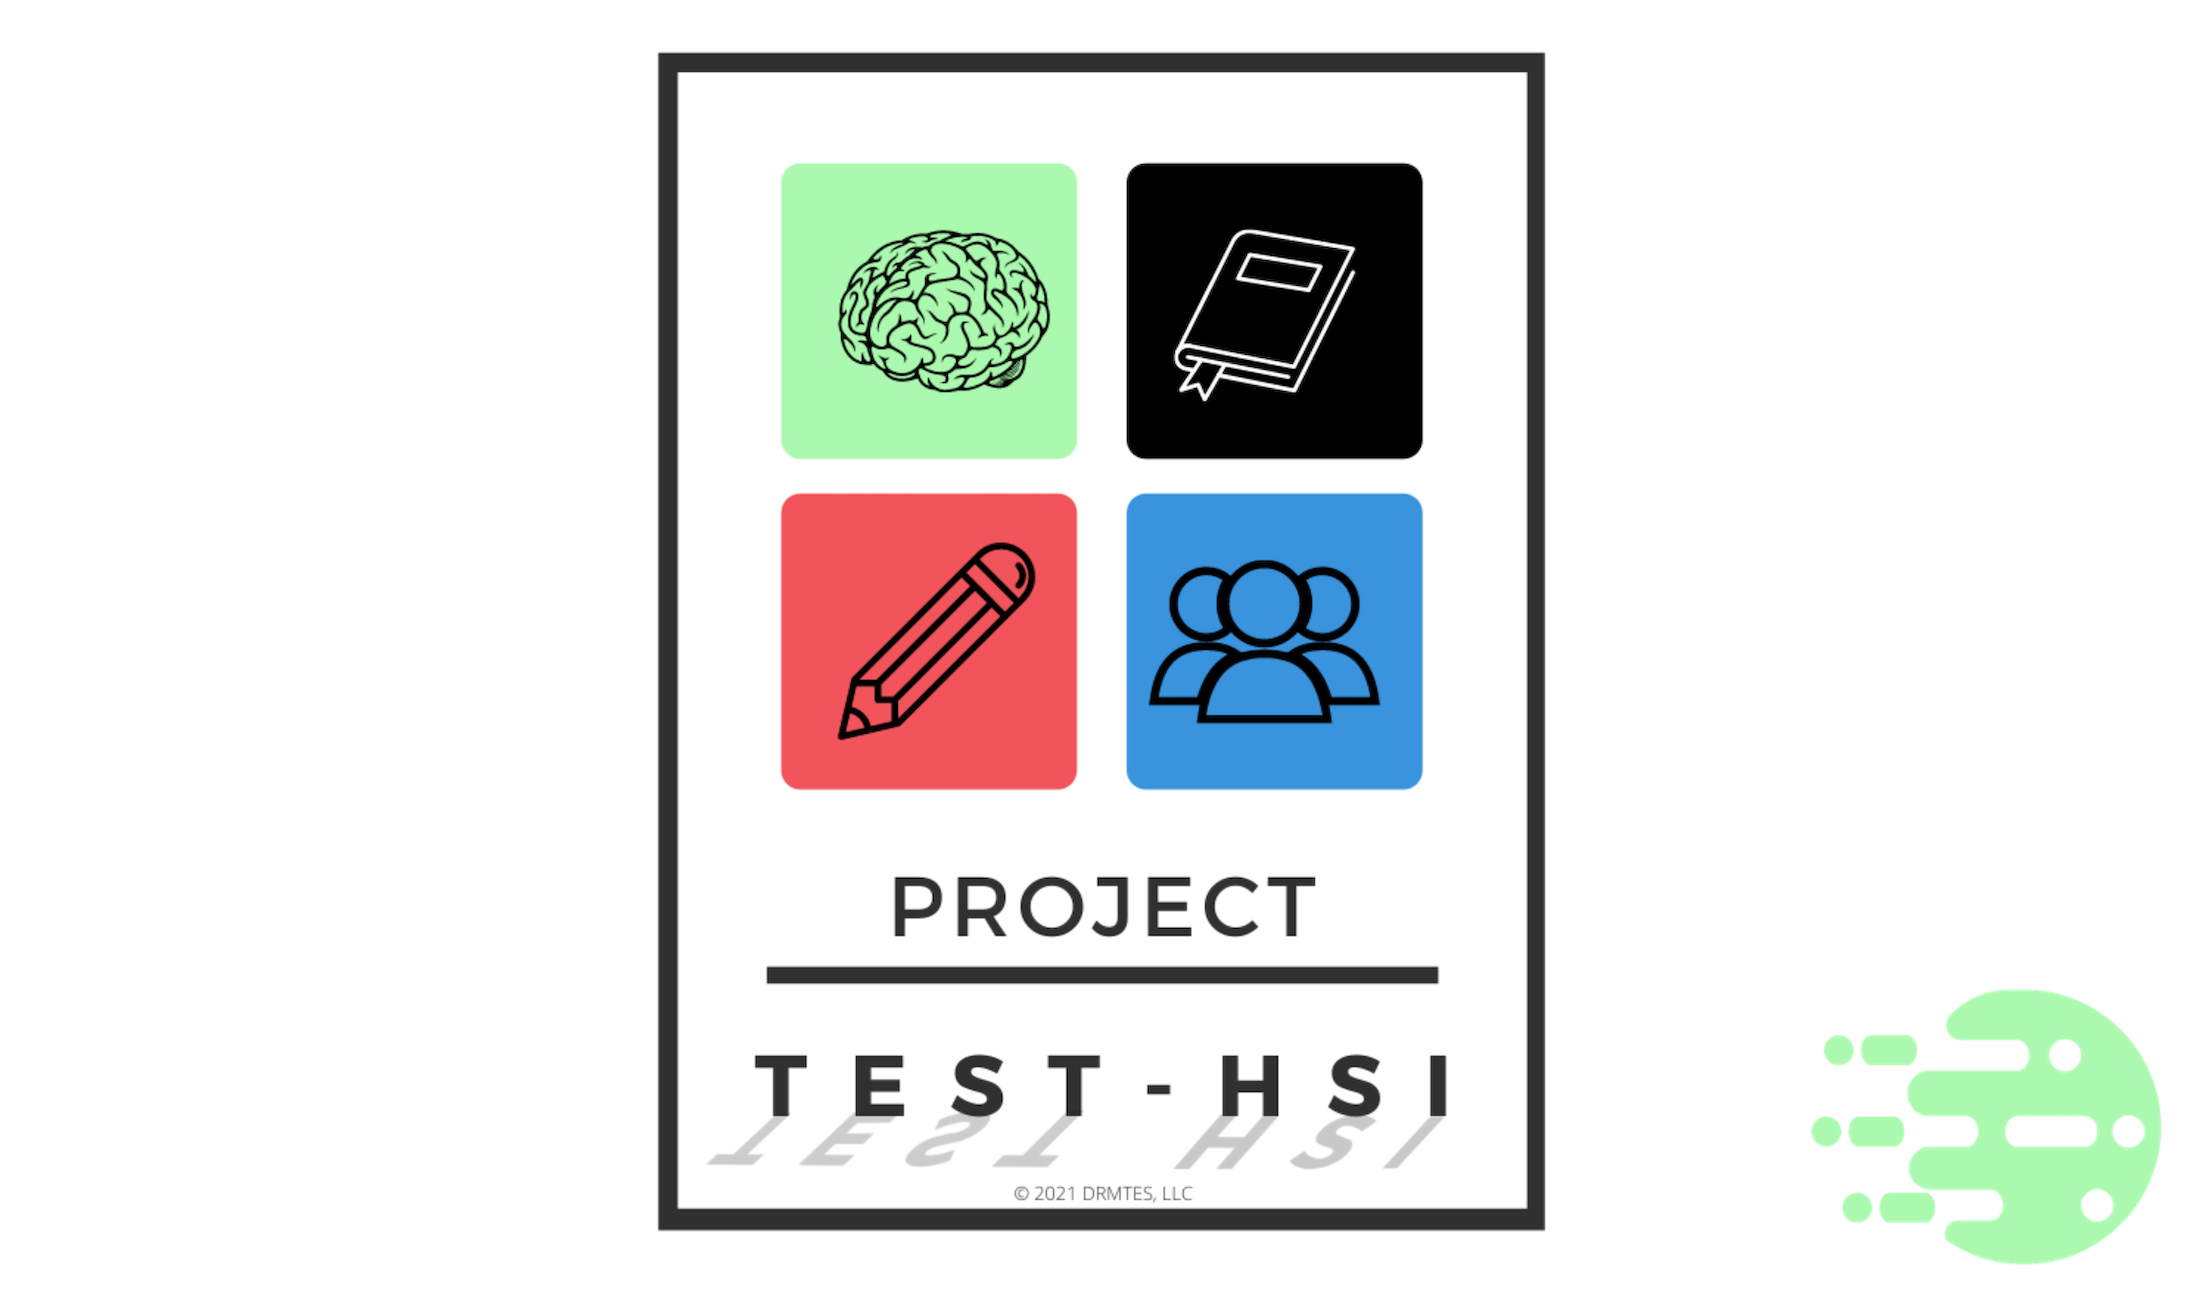 Project TEST-HSI